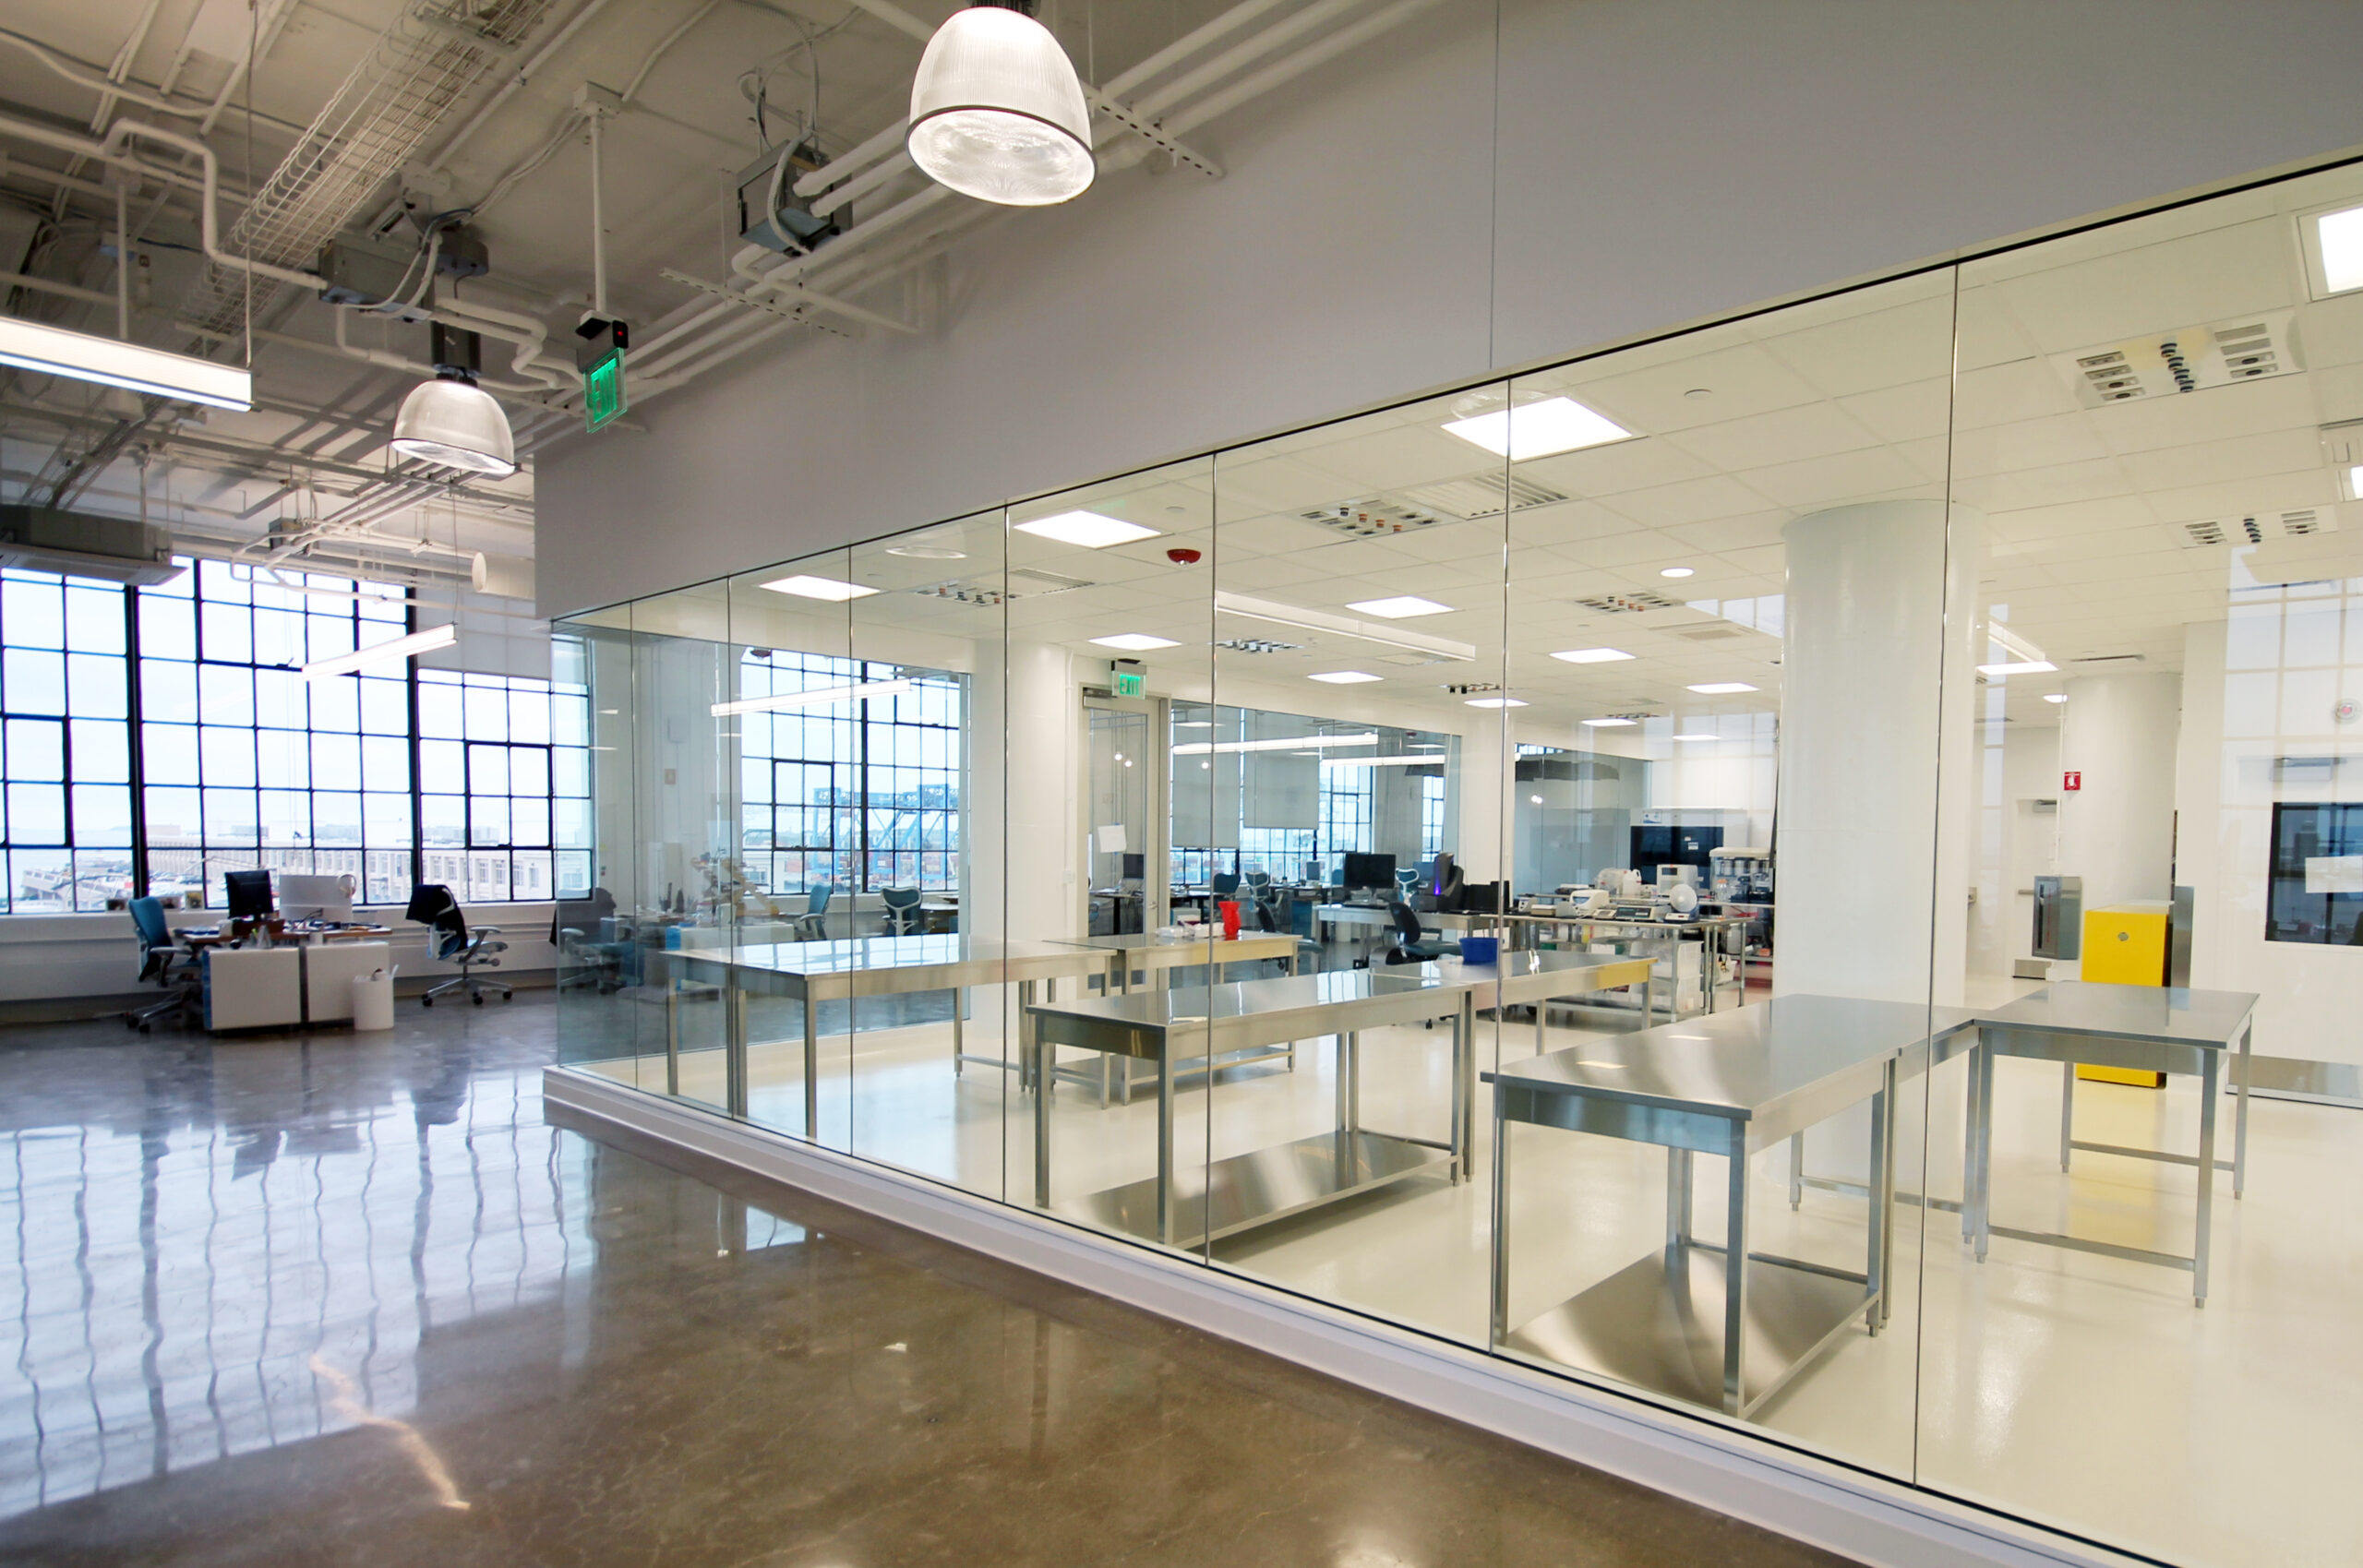 Glass encapsulated labs, surrounded by collaborative work space.